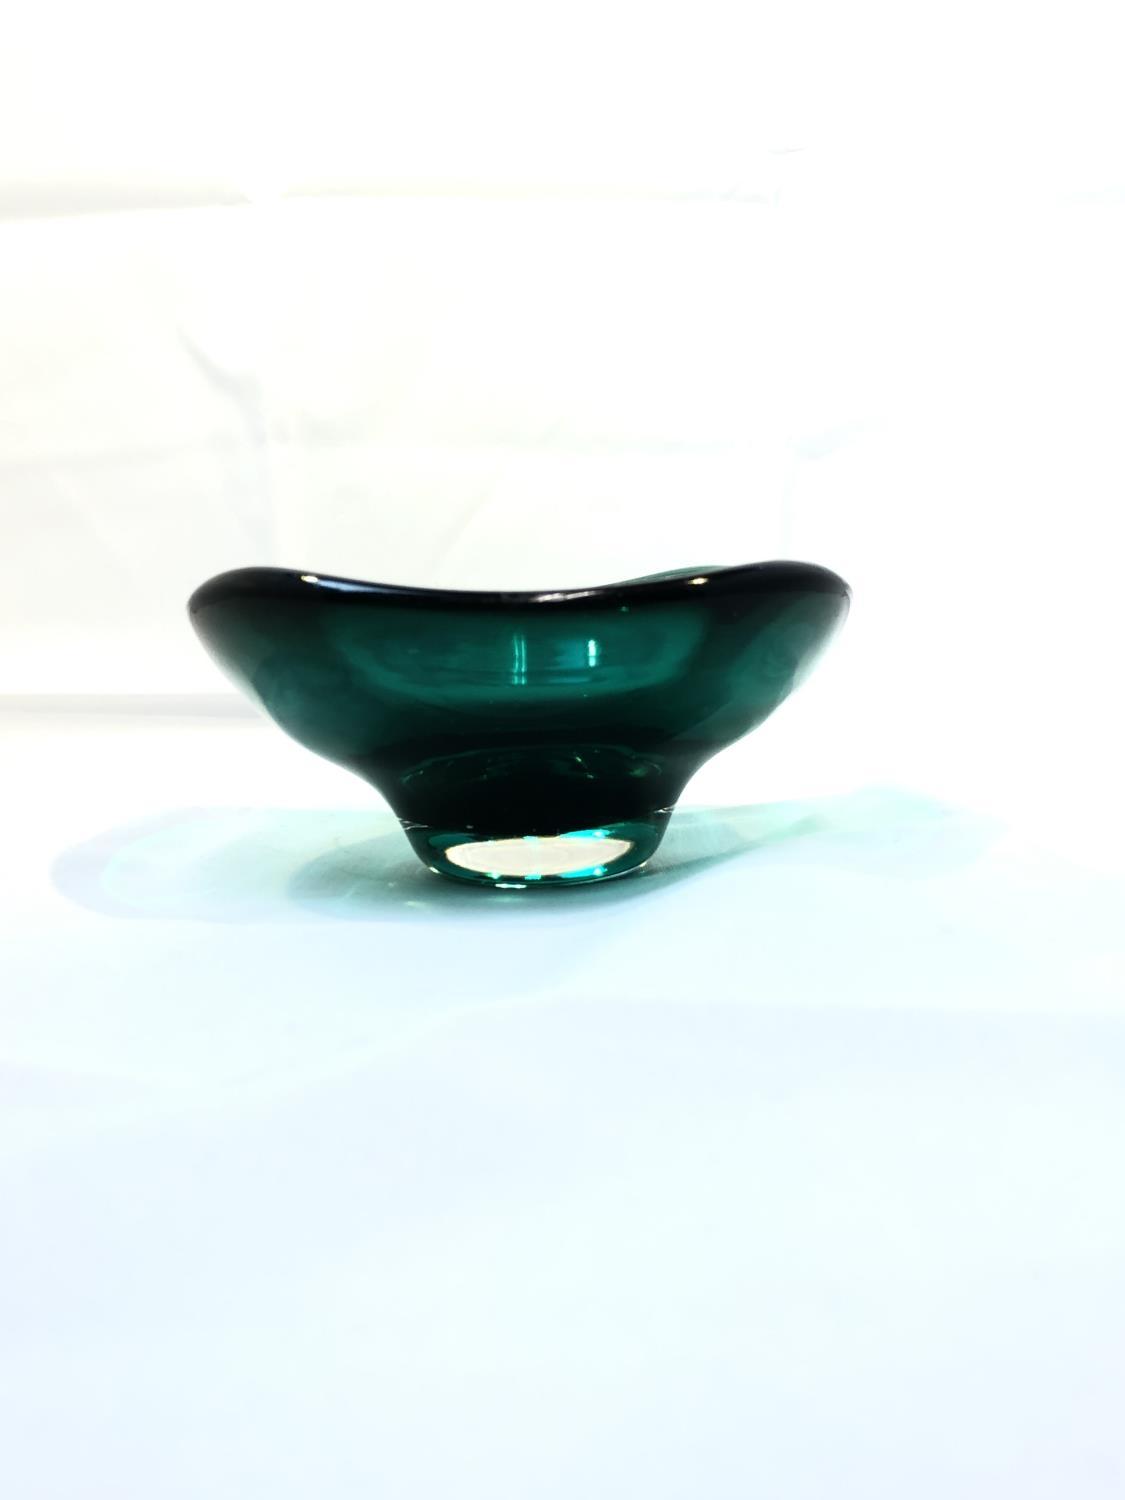 Geoffrey Baxter for Whitefriars - a 9493 arctic green glass vase with cut and polished neck, 24cm - Image 10 of 12